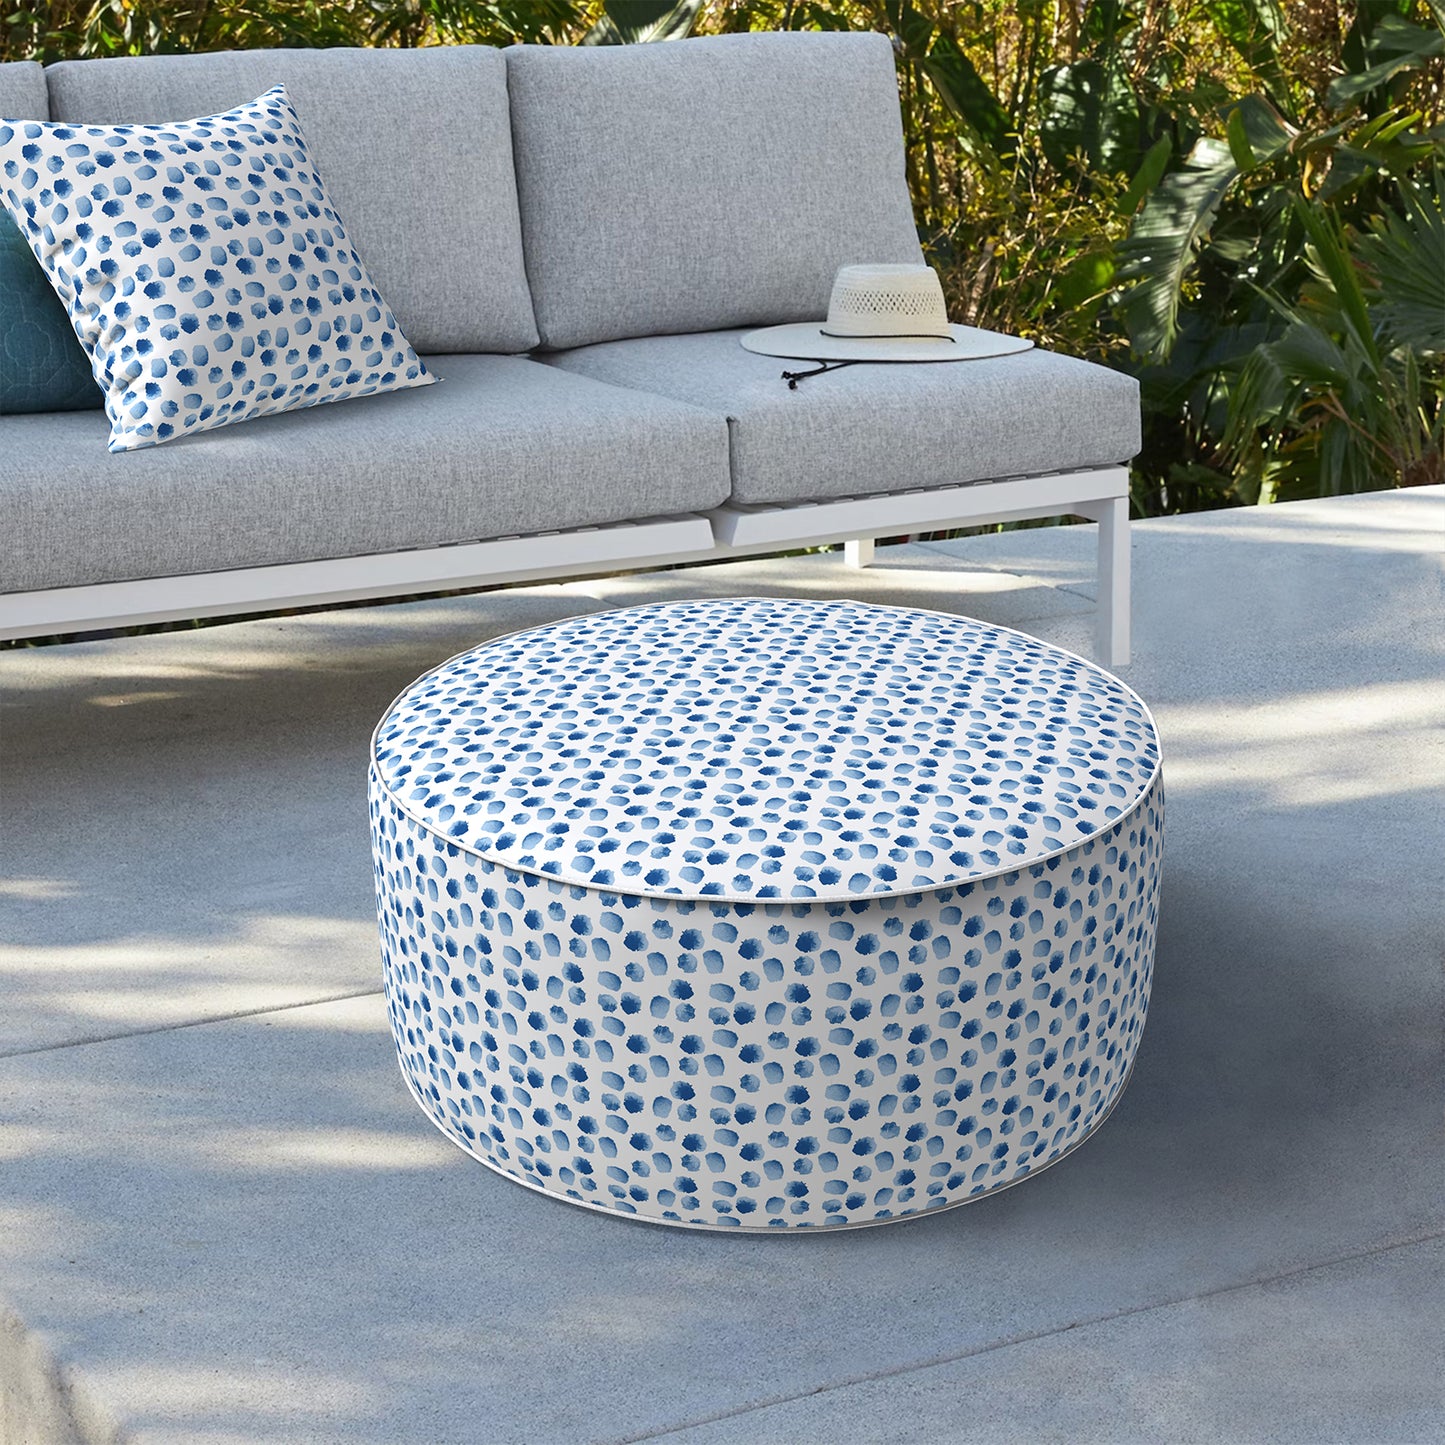 Outdoor Inflatable Stool Ottoman, All Weather Portable Footrest Stool, Furniture Stool Ottomans for Home Garden Beach, D31”xH14”, Brush Blue